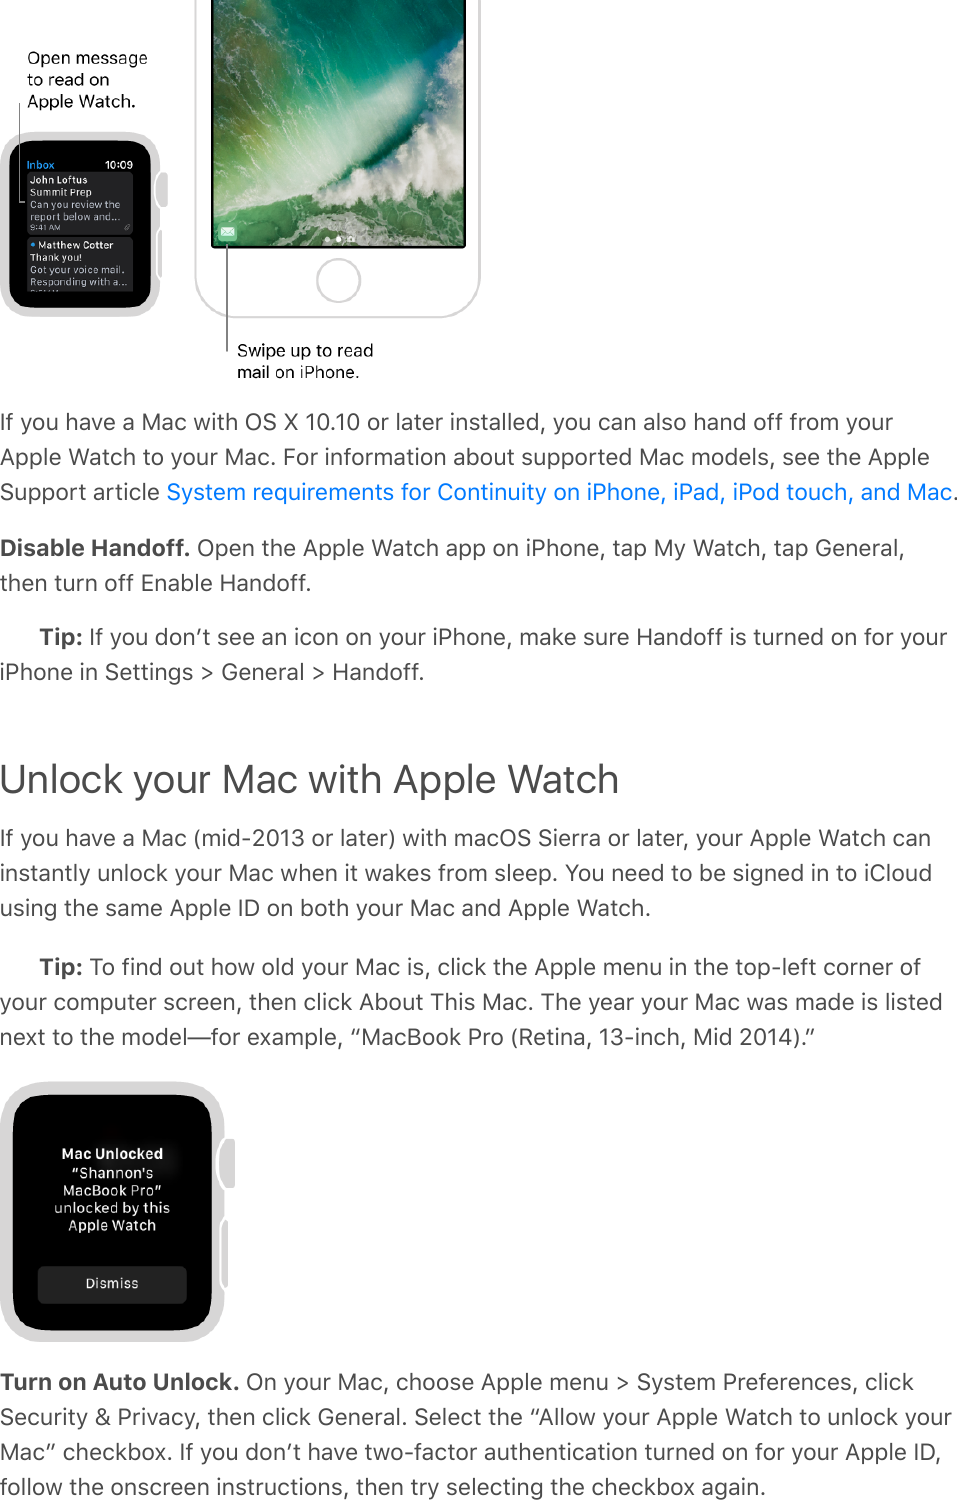 If you have a Mac with OS X 10.10 or later installed, you can also hand off from yourApple Watch to your Mac. For information about supported Mac models, see the AppleSupport article  .Disable Handoff. Open the Apple Watch app on iPhone, tap My Watch, tap General,then turn off Enable Handoff.Tip: If you donʼt see an icon on your iPhone, make sure Handoff is turned on for youriPhone in Settings &gt; General &gt; Handoff.Unlock your Mac with Apple WatchIf you have a Mac (mid-2013 or later) with macOS Sierra or later, your Apple Watch caninstantly unlock your Mac when it wakes from sleep. You need to be signed in to iCloudusing the same Apple ID on both your Mac and Apple Watch.Tip: To find out how old your Mac is, click the Apple menu in the top-left corner ofyour computer screen, then click About This Mac. The year your Mac was made is listednext to the model—for example, “MacBook Pro (Retina, 13-inch, Mid 2014).”Turn on Auto Unlock. On your Mac, choose Apple menu &gt; System Preferences, clickSecurity &amp; Privacy, then click General. Select the “Allow your Apple Watch to unlock yourMac” checkbox. If you donʼt have two-factor authentication turned on for your Apple ID,follow the onscreen instructions, then try selecting the checkbox again.System requirements for Continuity on iPhone, iPad, iPod touch, and Mac